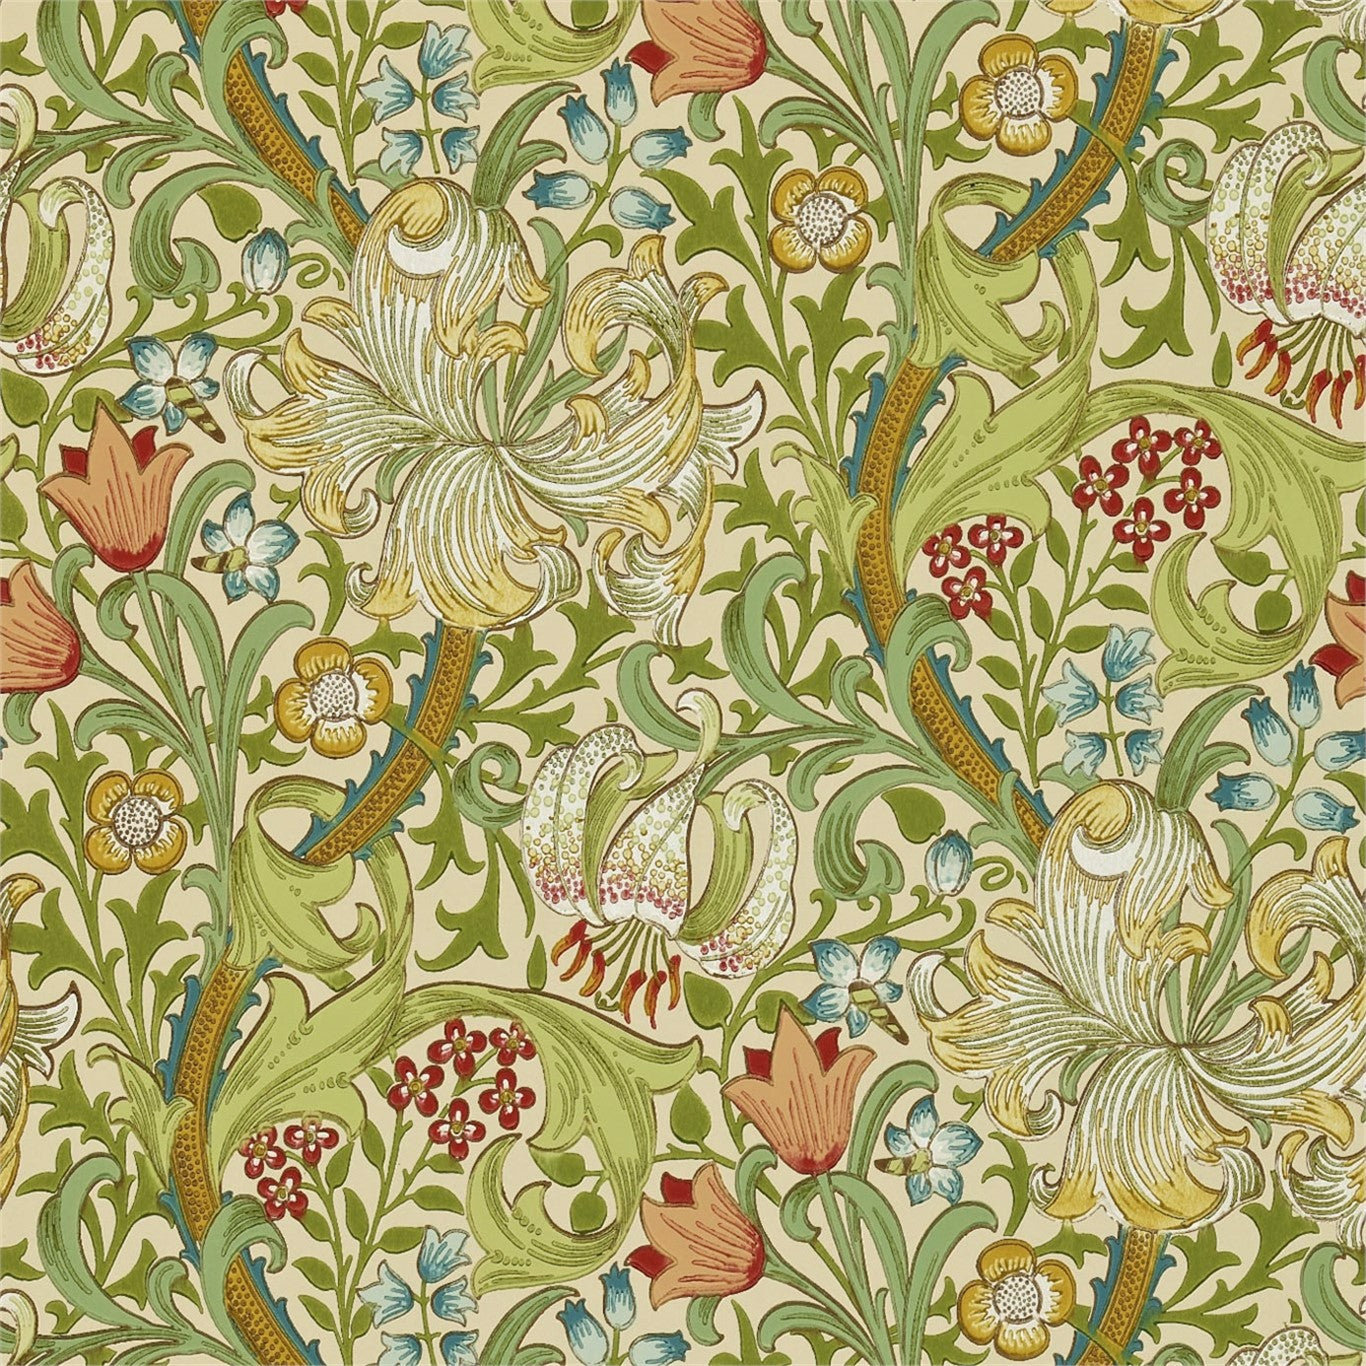 William Morris Golden Lily Wallpaper DMCR216464 by Morris & Co